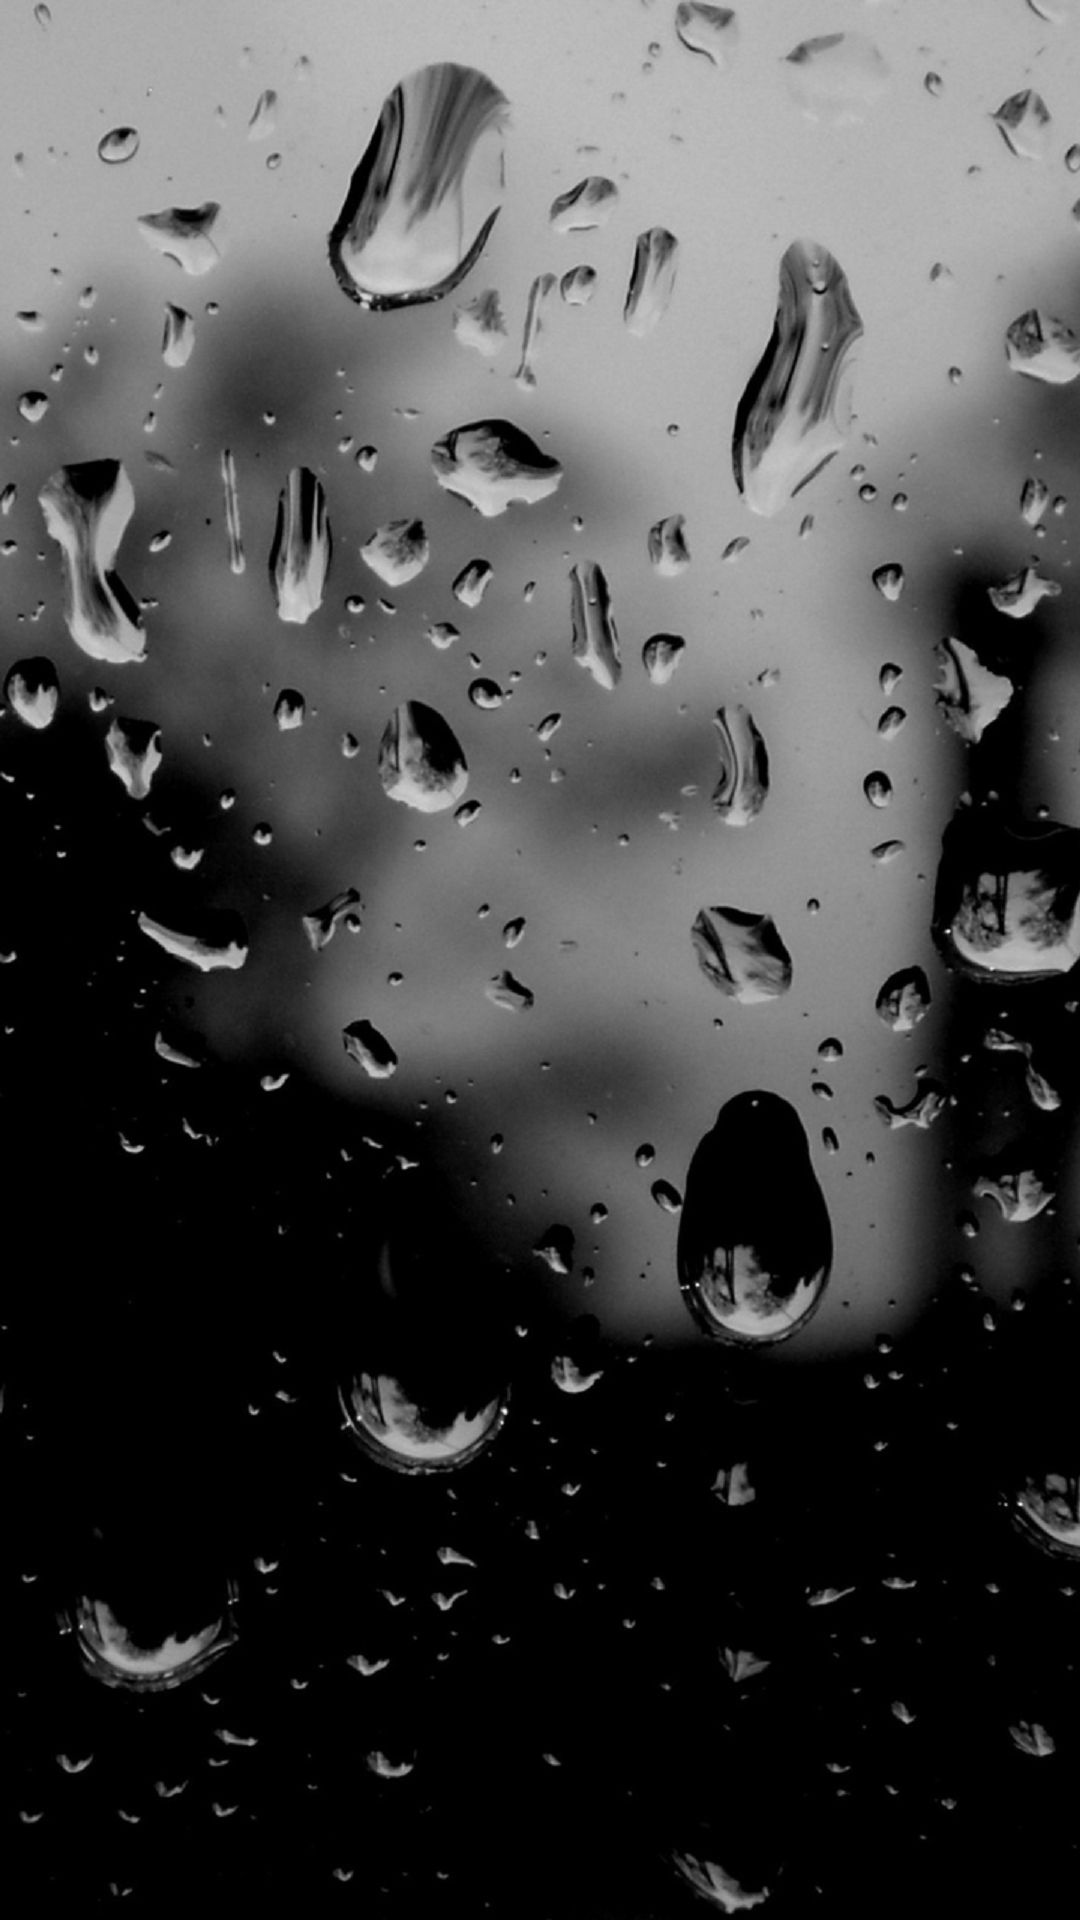 Black And White Raindrops On Glass Android Wallpaper free download